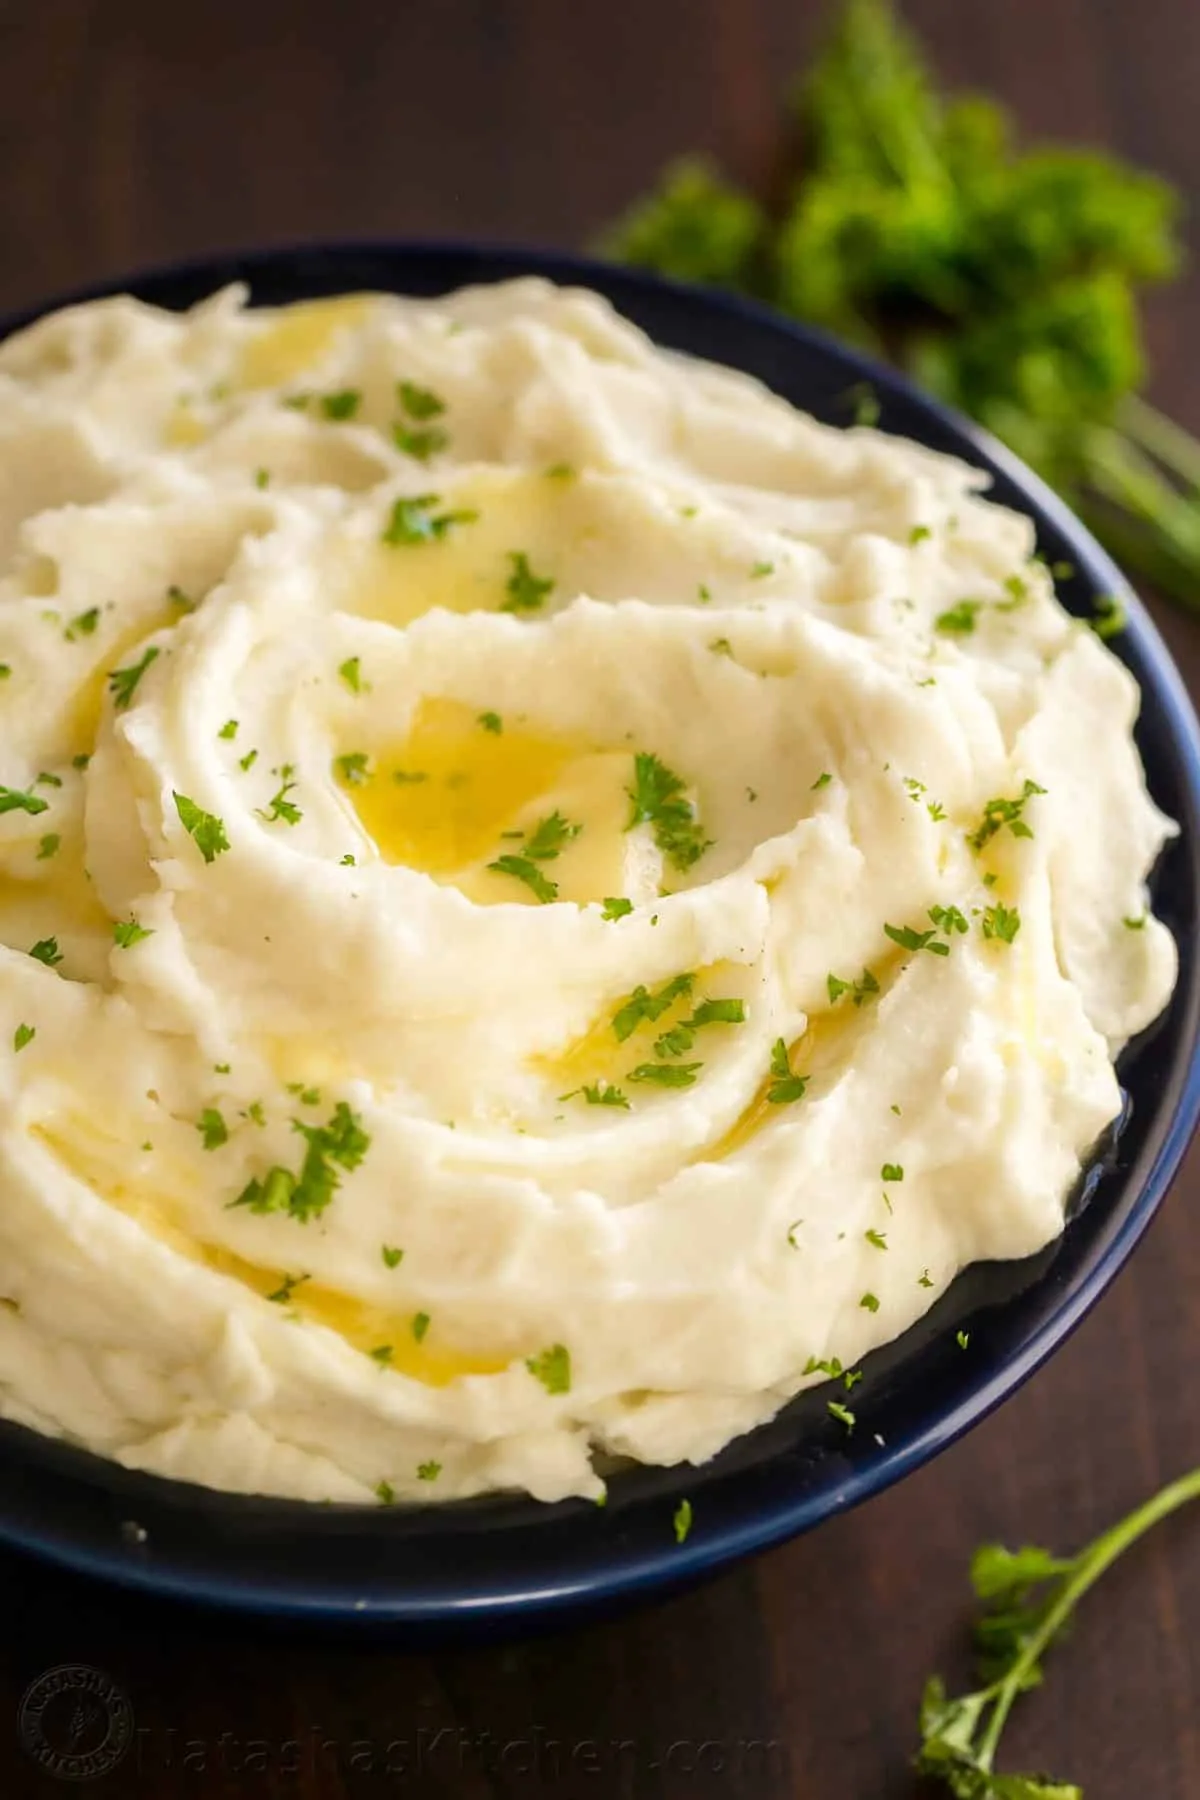 Mashed potatoes in a black bowl on a table with garnish on top.  